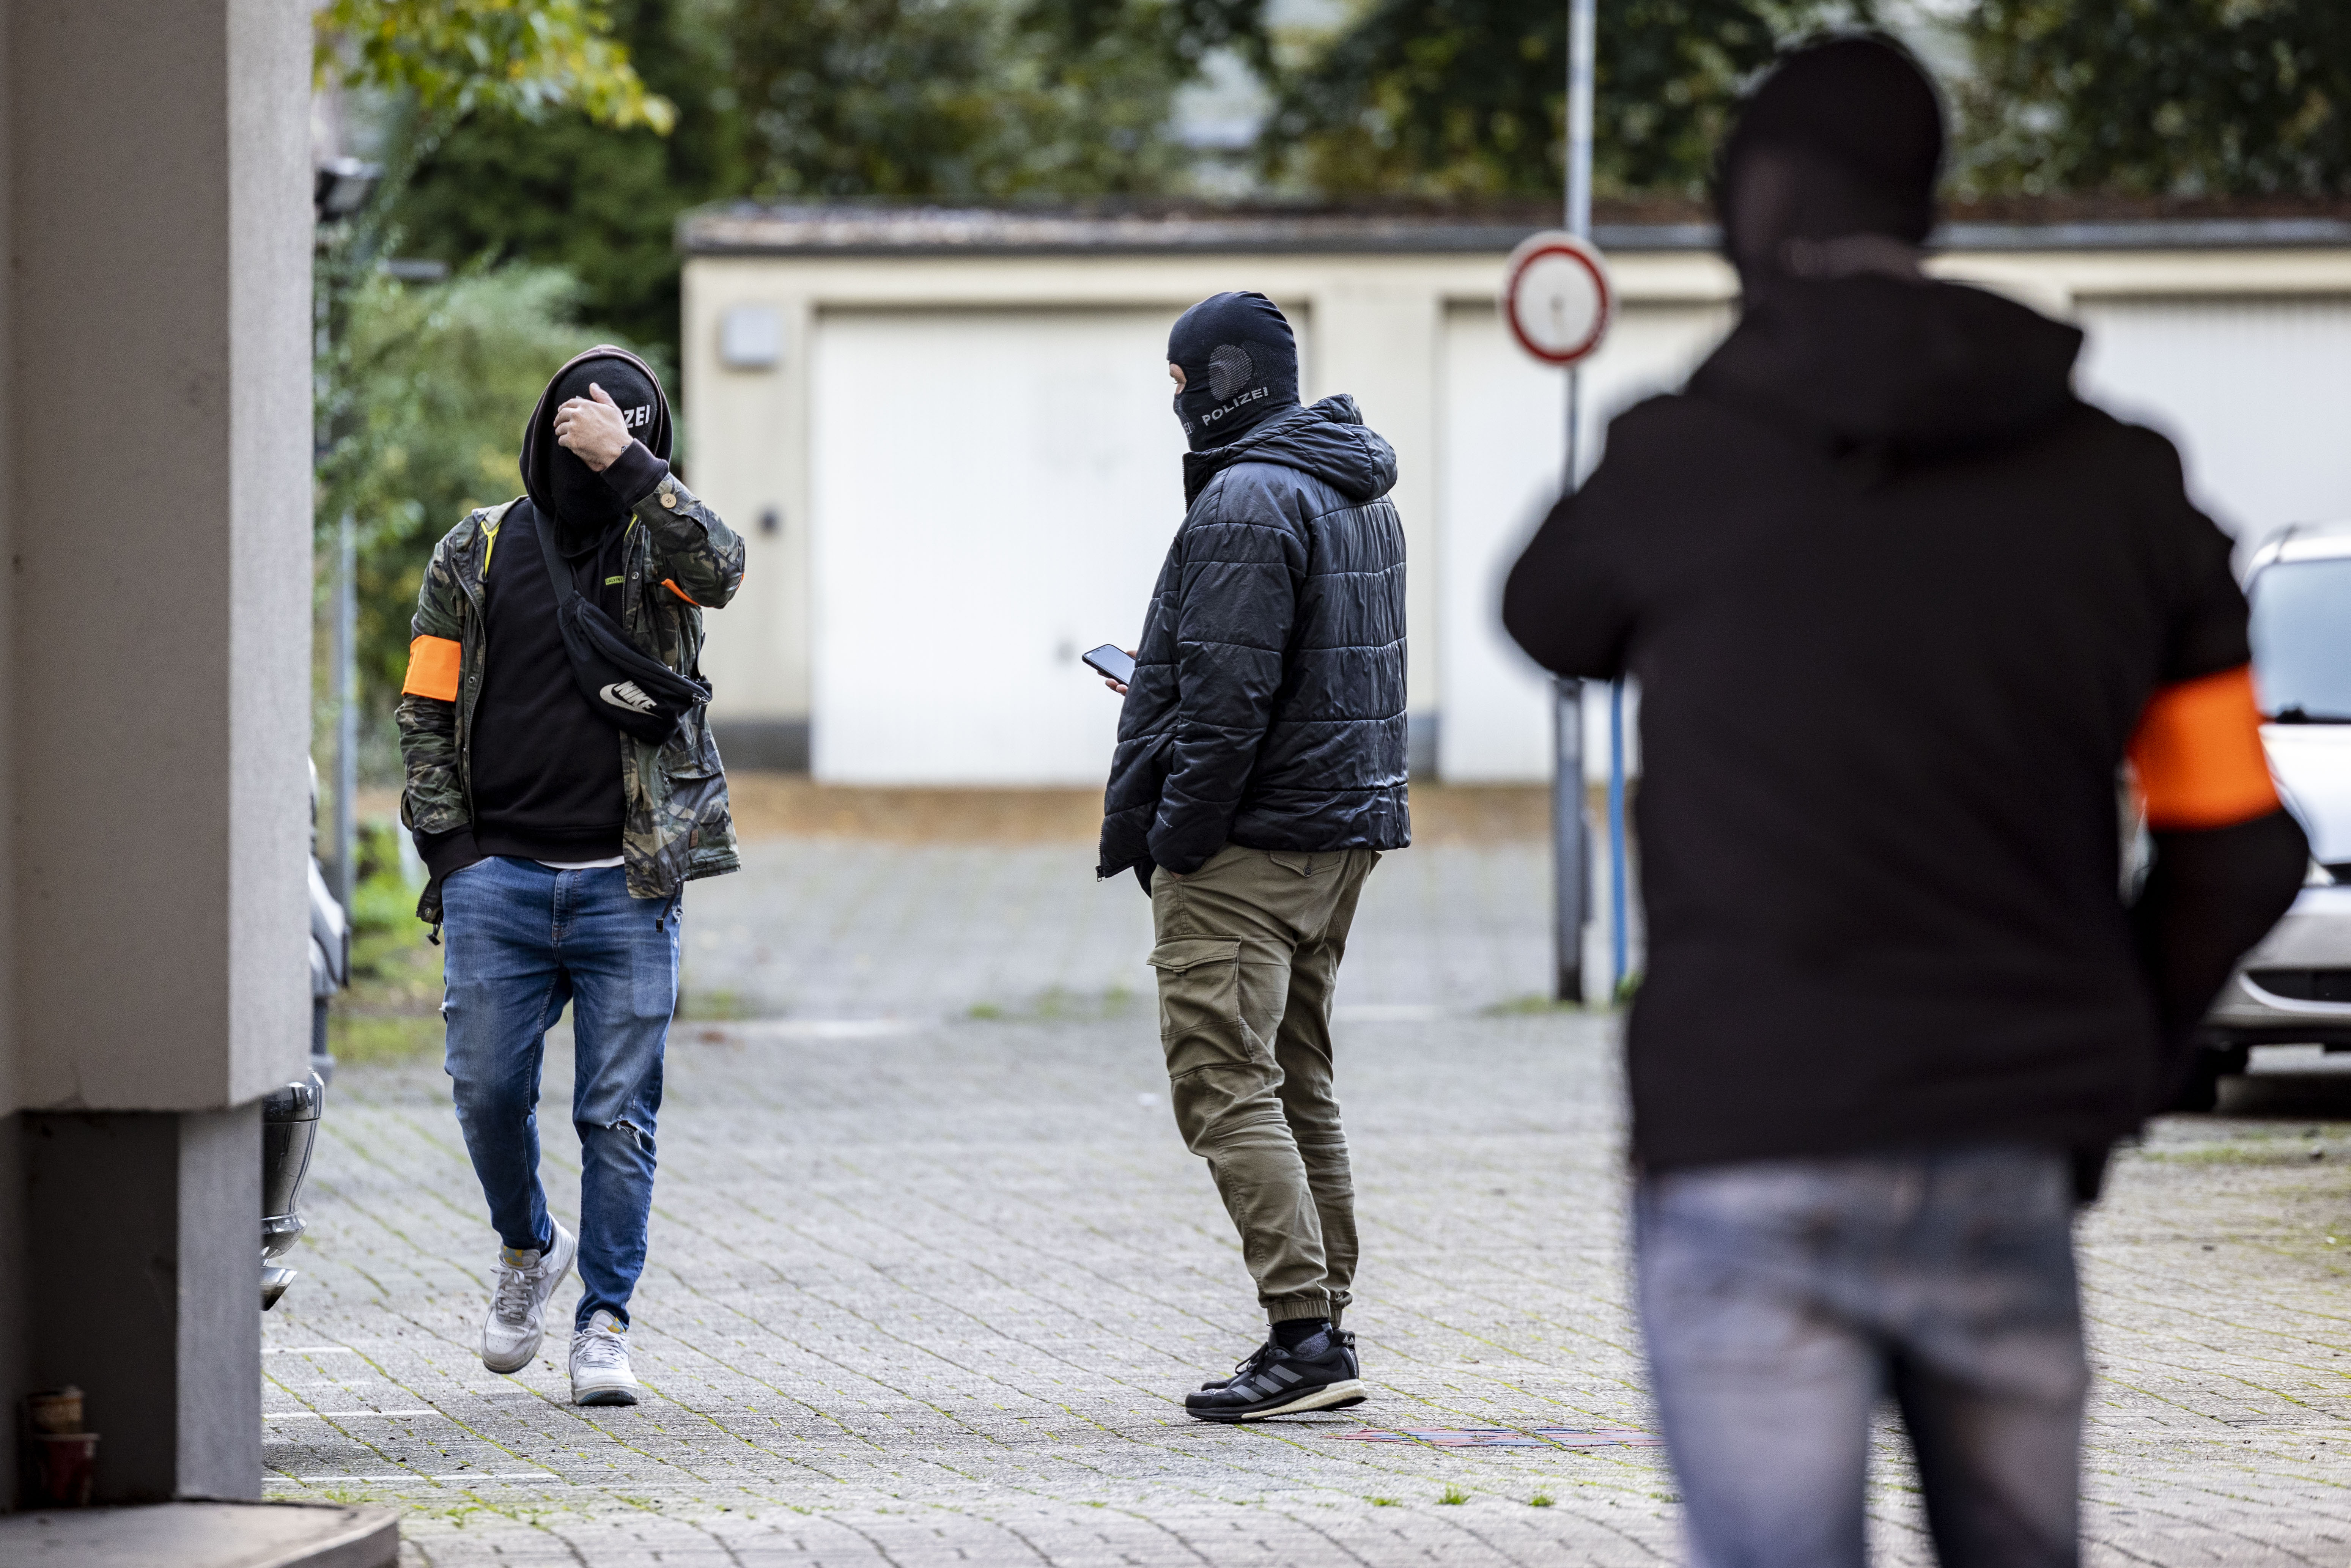 Two Men Arrested in Belgium and Germany for Suspected Terror Attacks Linked to Gaza Conflict